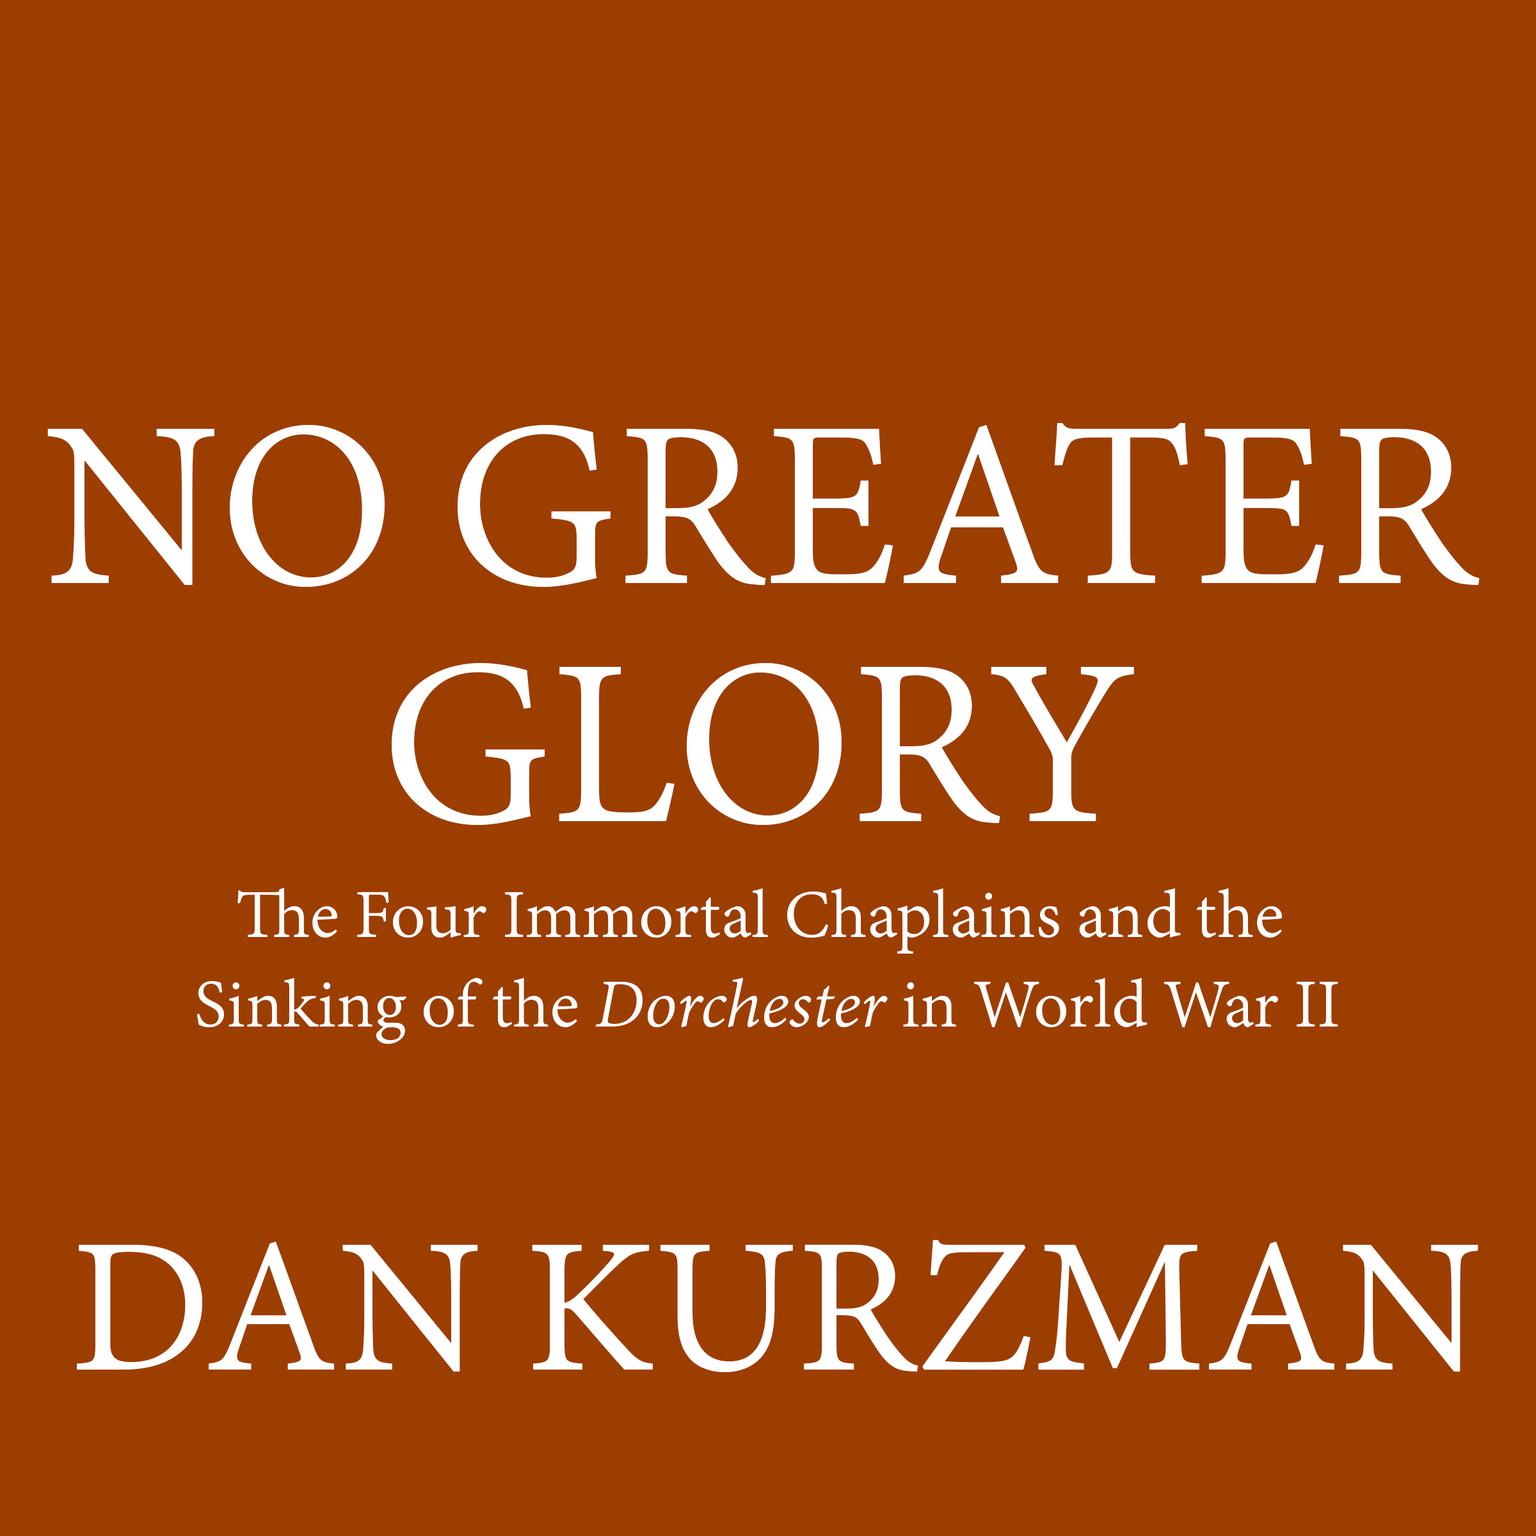 No Greater Glory: The Four Immortal Chaplains and the Sinking of the Dorchester in World War II Audiobook, by Dan Kurzman